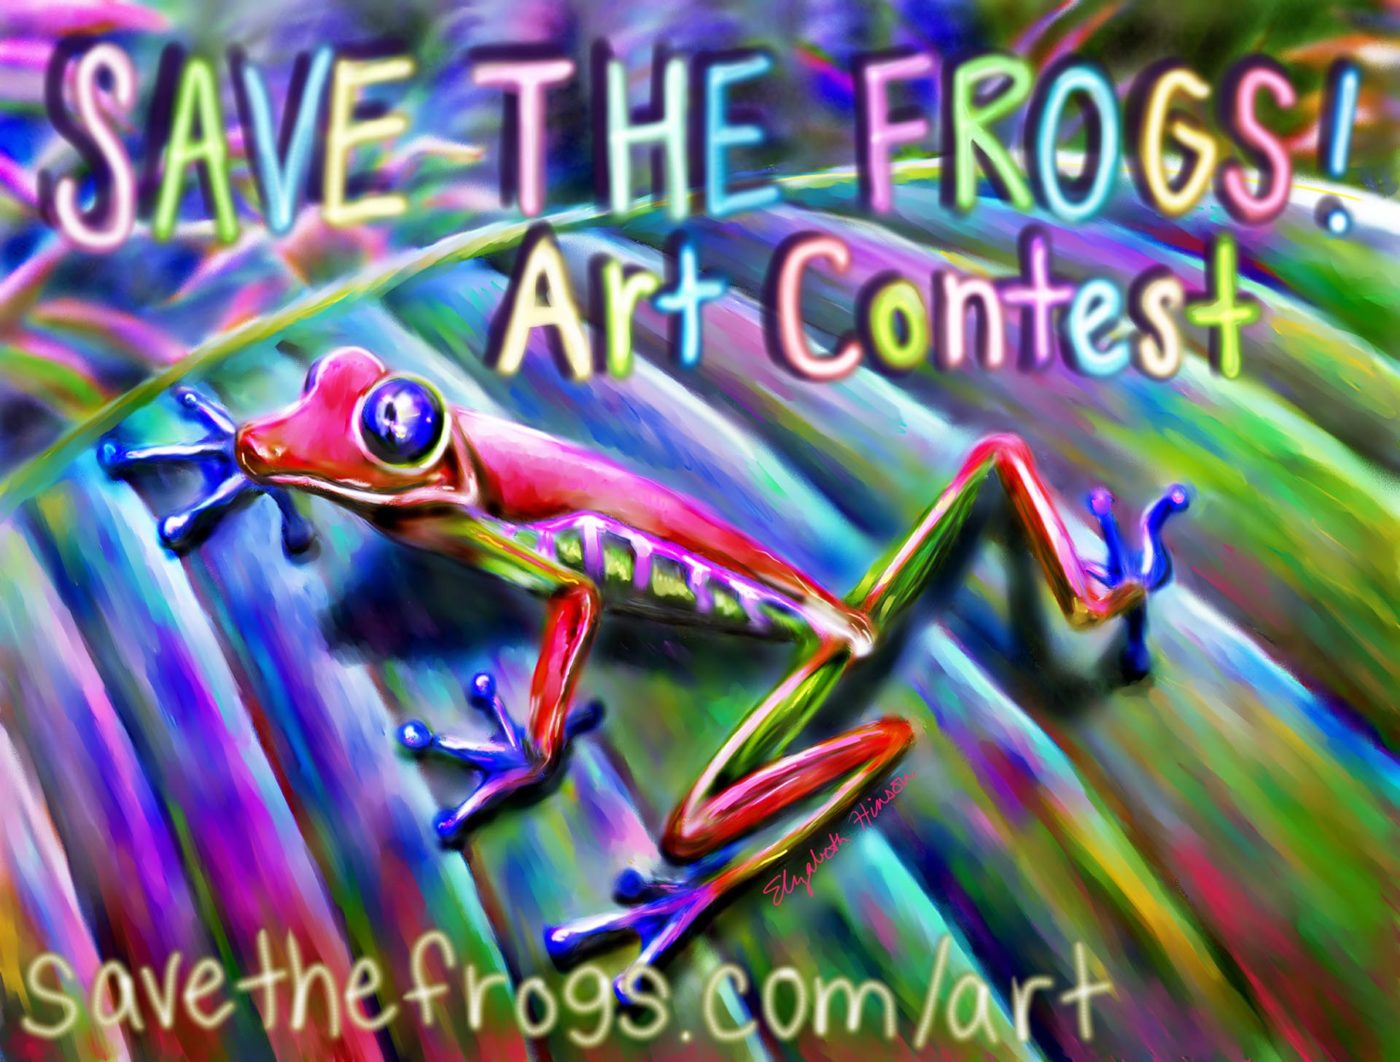 SAVE THE FROGS! Art Contest